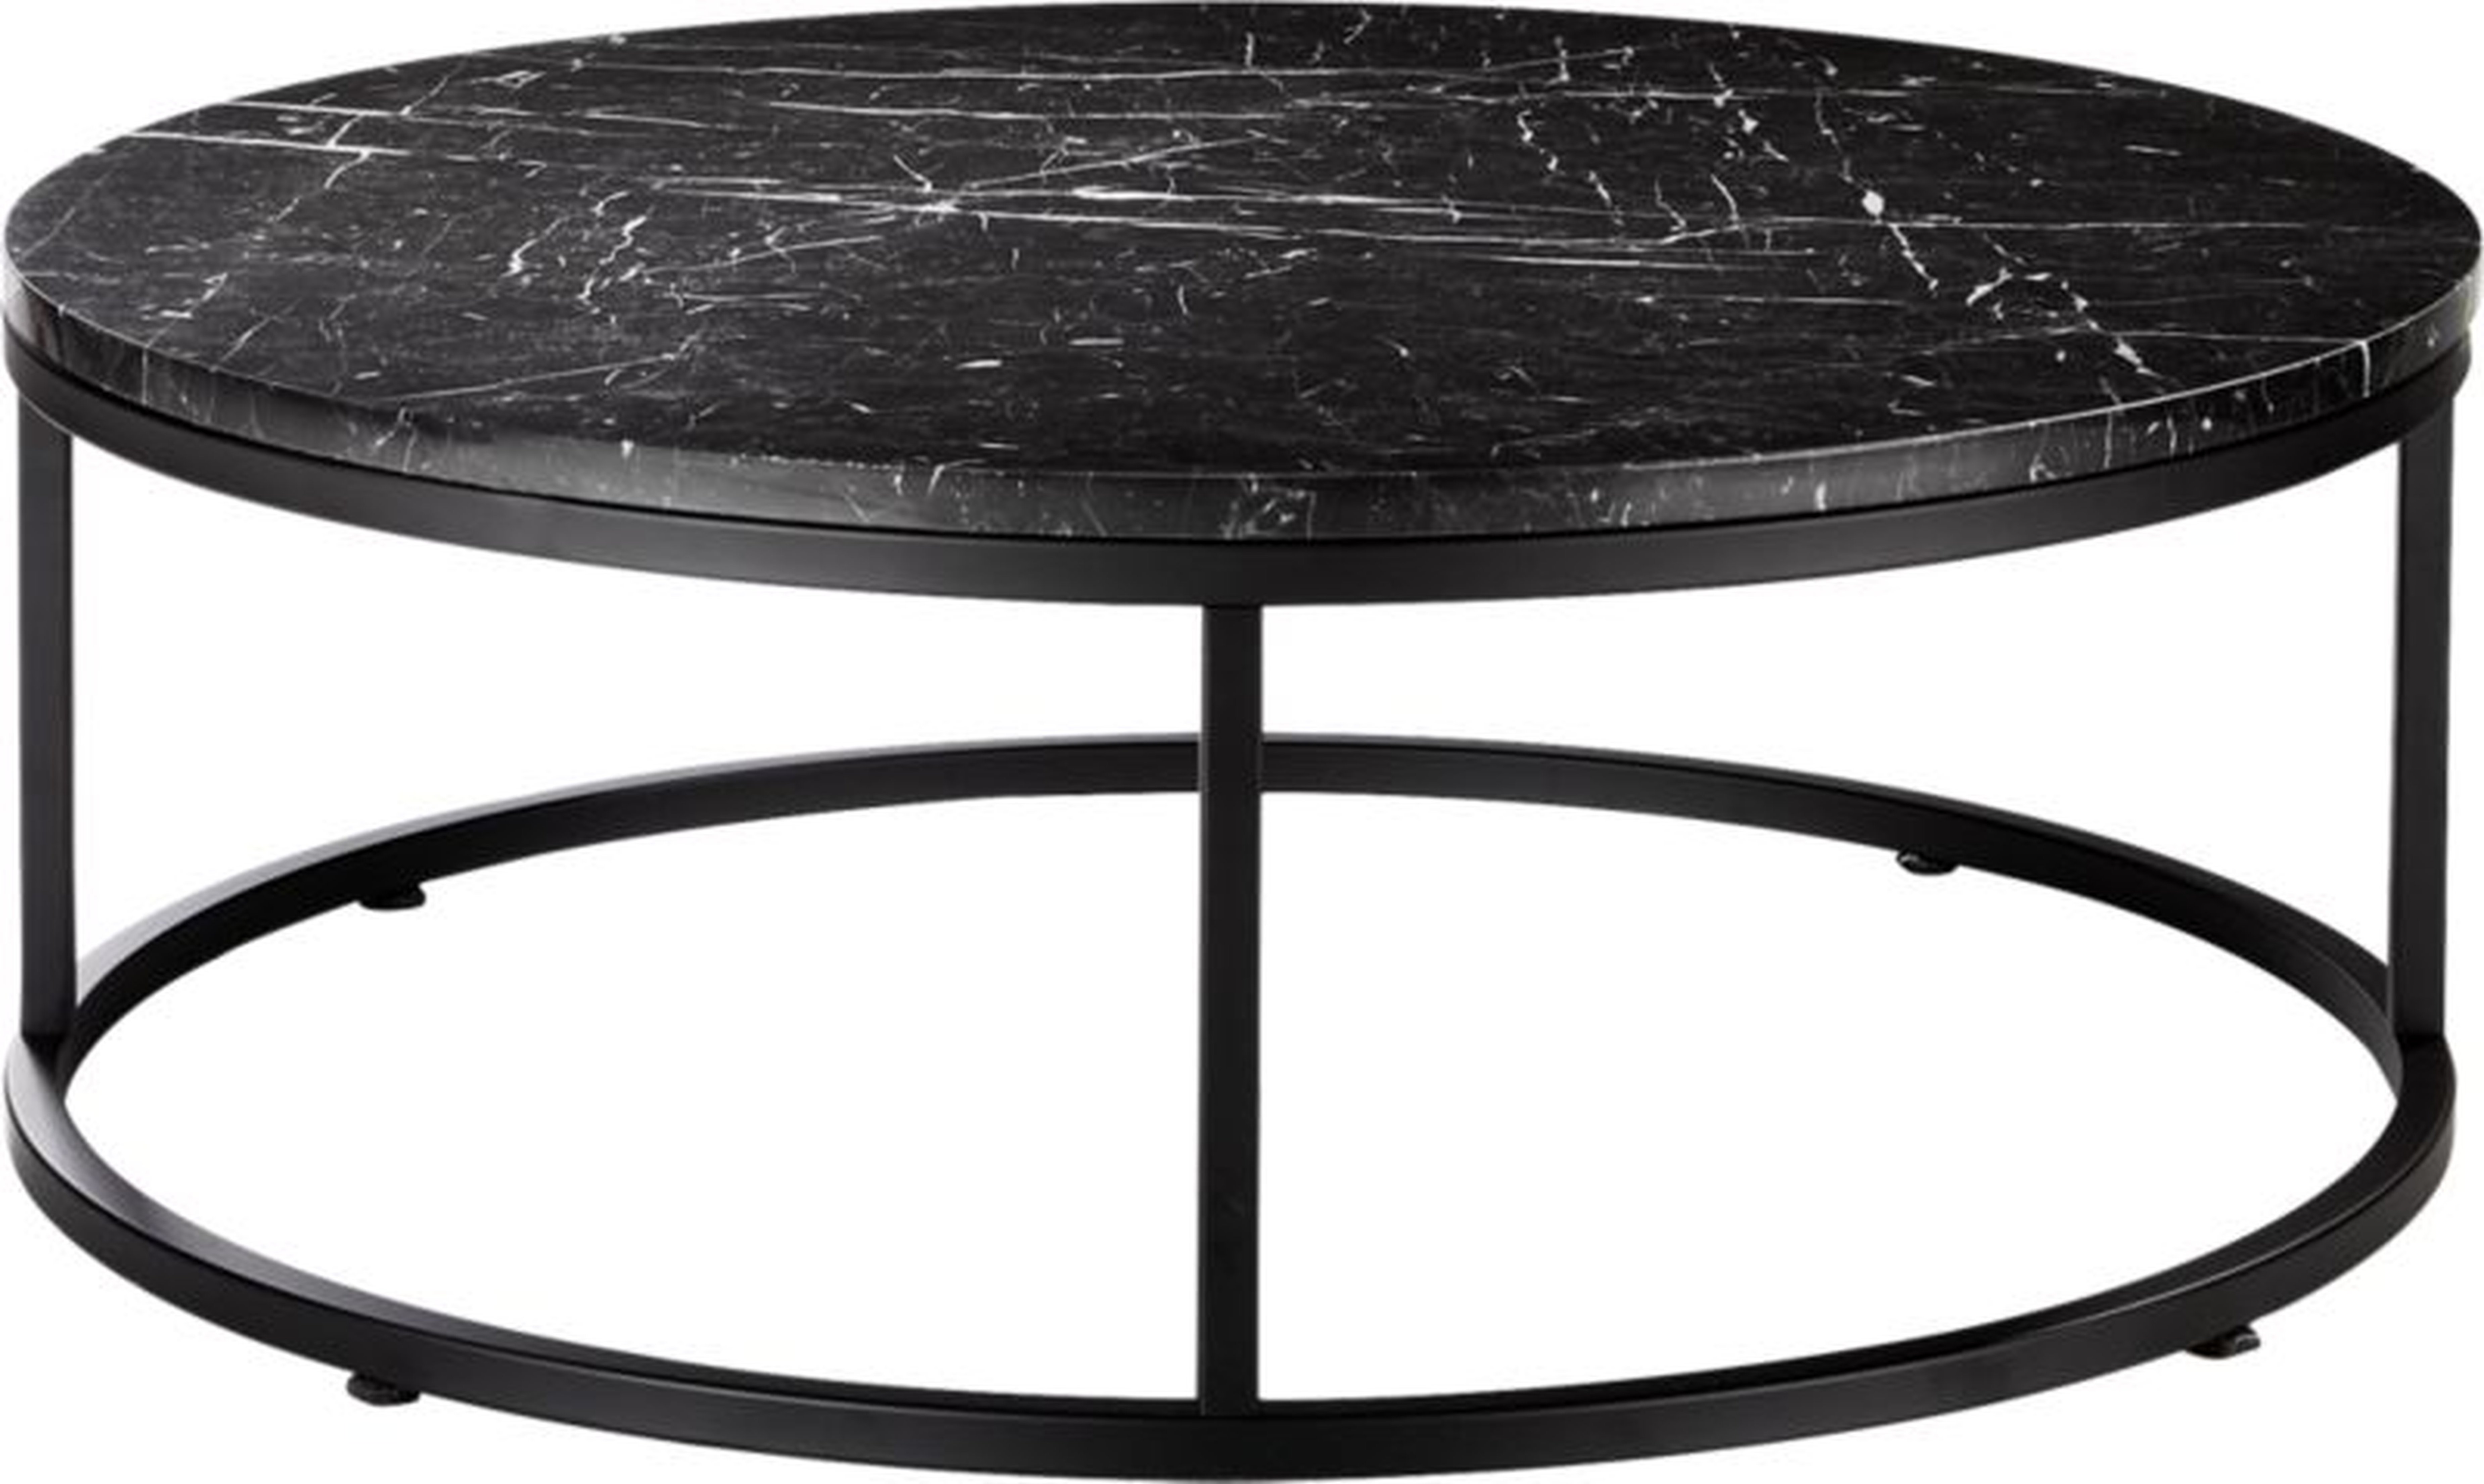 Smart Round Coffee Table, Black Marble - CB2